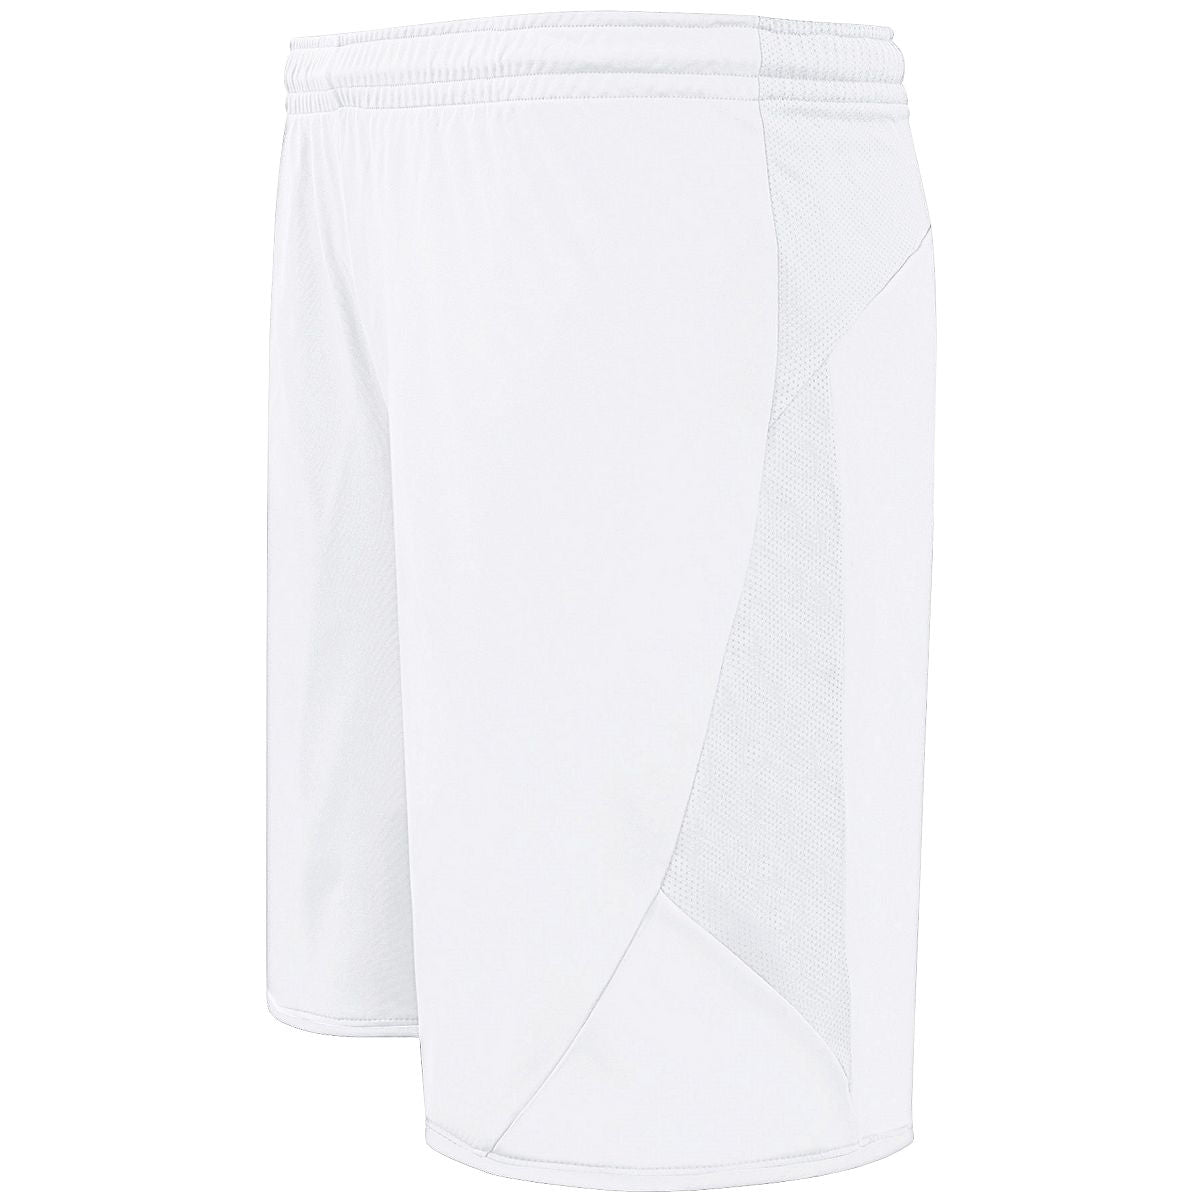 High 5 Club Shorts in White/White  -Part of the Adult, Adult-Shorts, High5-Products, Soccer, All-Sports-1 product lines at KanaleyCreations.com